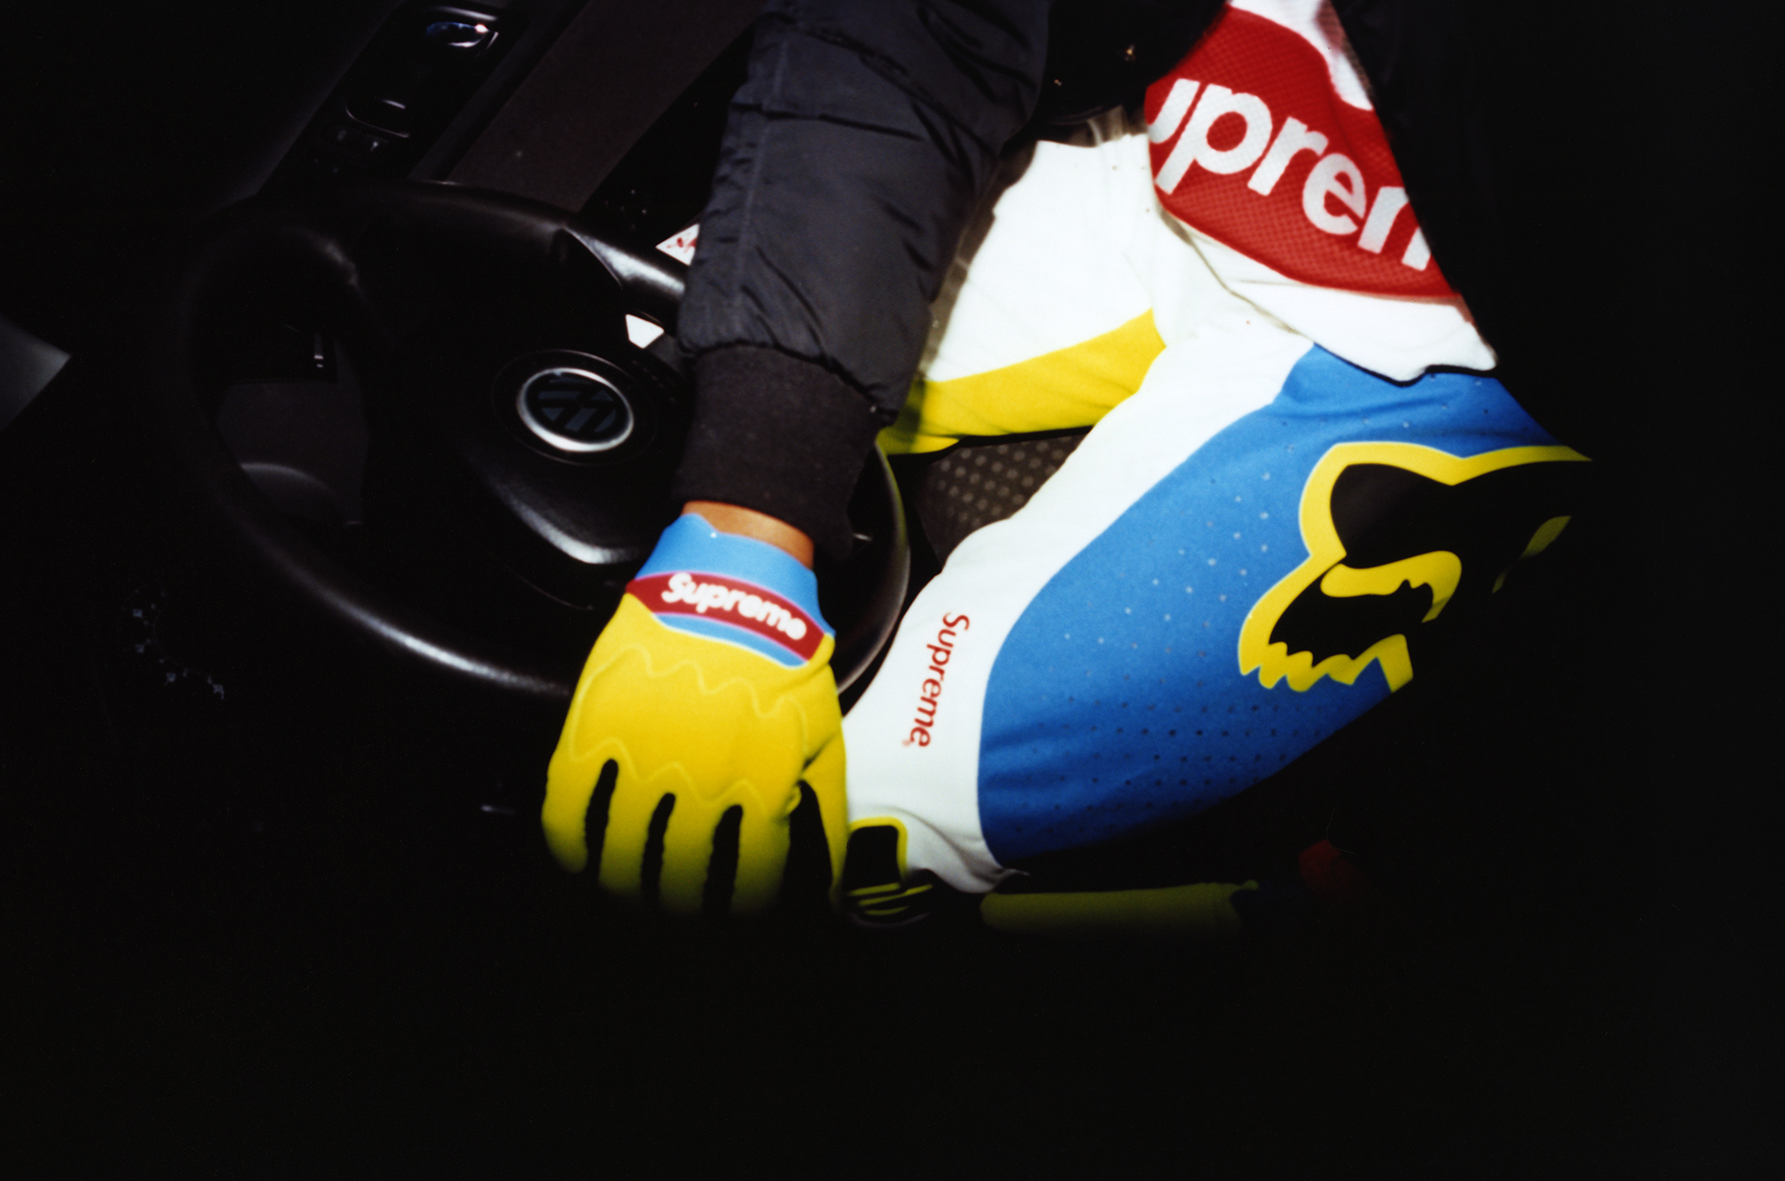 get an exclusive first look at supreme’s fresh collab with fox racing - i-D